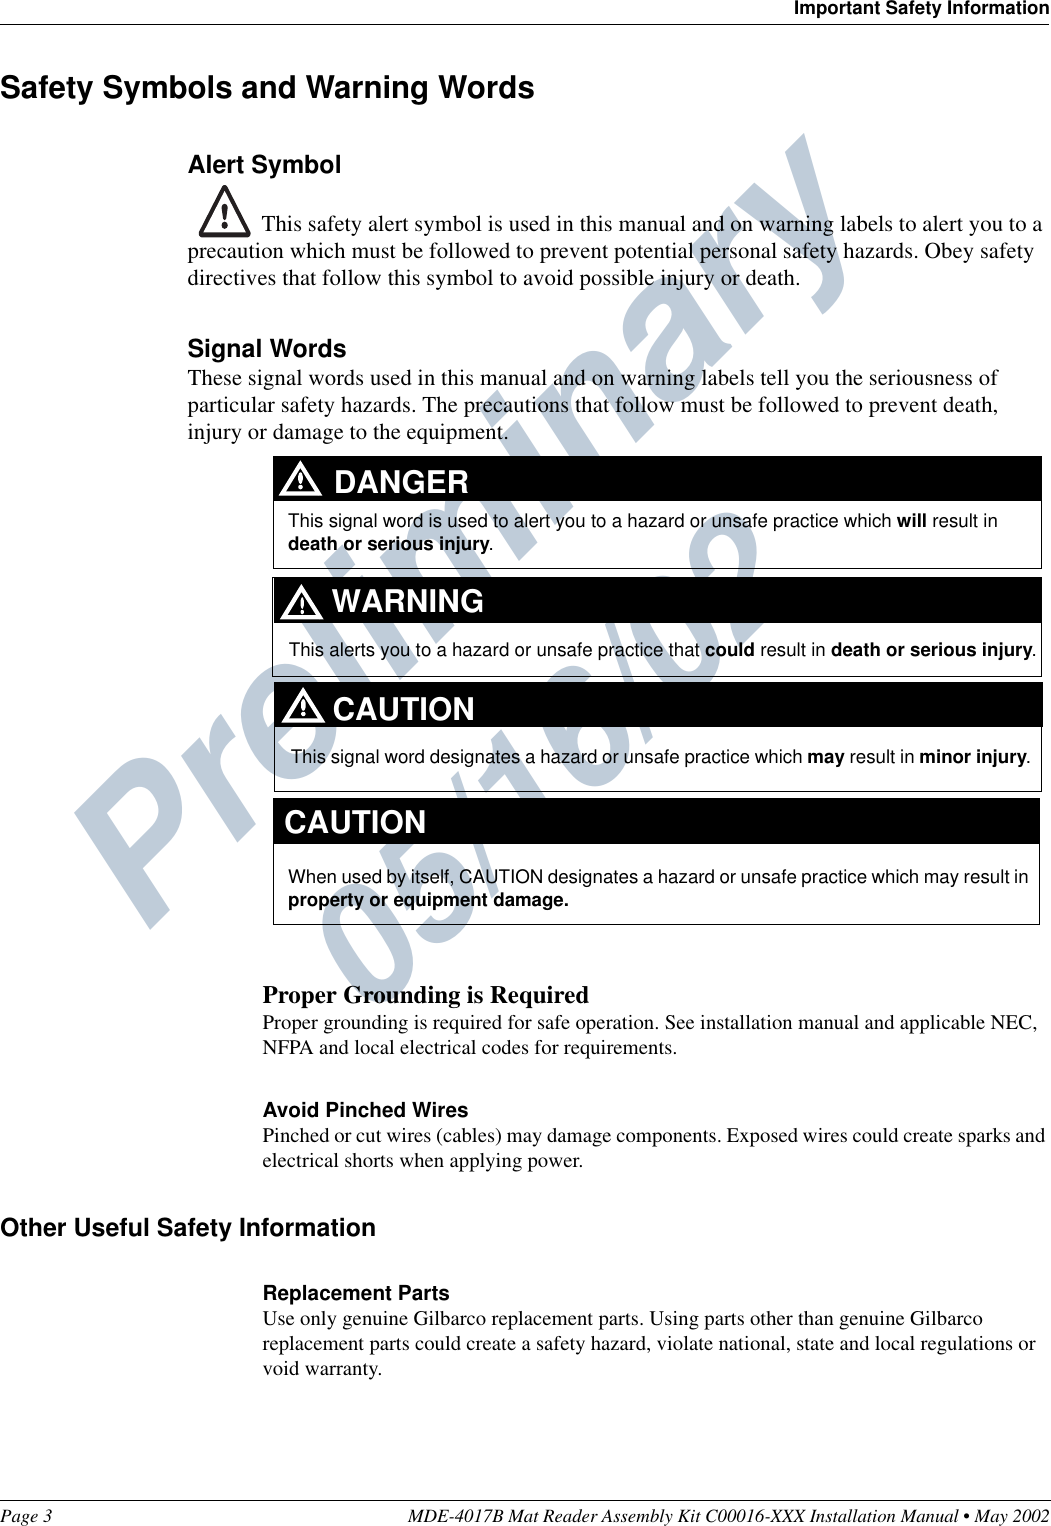 Preliminary  05/16/02Page 3 MDE-4017B Mat Reader Assembly Kit C00016-XXX Installation Manual • May 2002Important Safety InformationSafety Symbols and Warning WordsAlert Symbol This safety alert symbol is used in this manual and on warning labels to alert you to a precaution which must be followed to prevent potential personal safety hazards. Obey safety directives that follow this symbol to avoid possible injury or death.Signal WordsThese signal words used in this manual and on warning labels tell you the seriousness of particular safety hazards. The precautions that follow must be followed to prevent death, injury or damage to the equipment.Proper Grounding is RequiredProper grounding is required for safe operation. See installation manual and applicable NEC, NFPA and local electrical codes for requirements.Avoid Pinched WiresPinched or cut wires (cables) may damage components. Exposed wires could create sparks and electrical shorts when applying power.Other Useful Safety InformationReplacement PartsUse only genuine Gilbarco replacement parts. Using parts other than genuine Gilbarco replacement parts could create a safety hazard, violate national, state and local regulations or void warranty.This signal word designates a hazard or unsafe practice which may result in minor injury.This signal word is used to alert you to a hazard or unsafe practice which will result in death or serious injury.This alerts you to a hazard or unsafe practice that could result in death or serious injury.CAUTIONWhen used by itself, CAUTION designates a hazard or unsafe practice which may result in property or equipment damage.CAUTIONDANGERWARNING